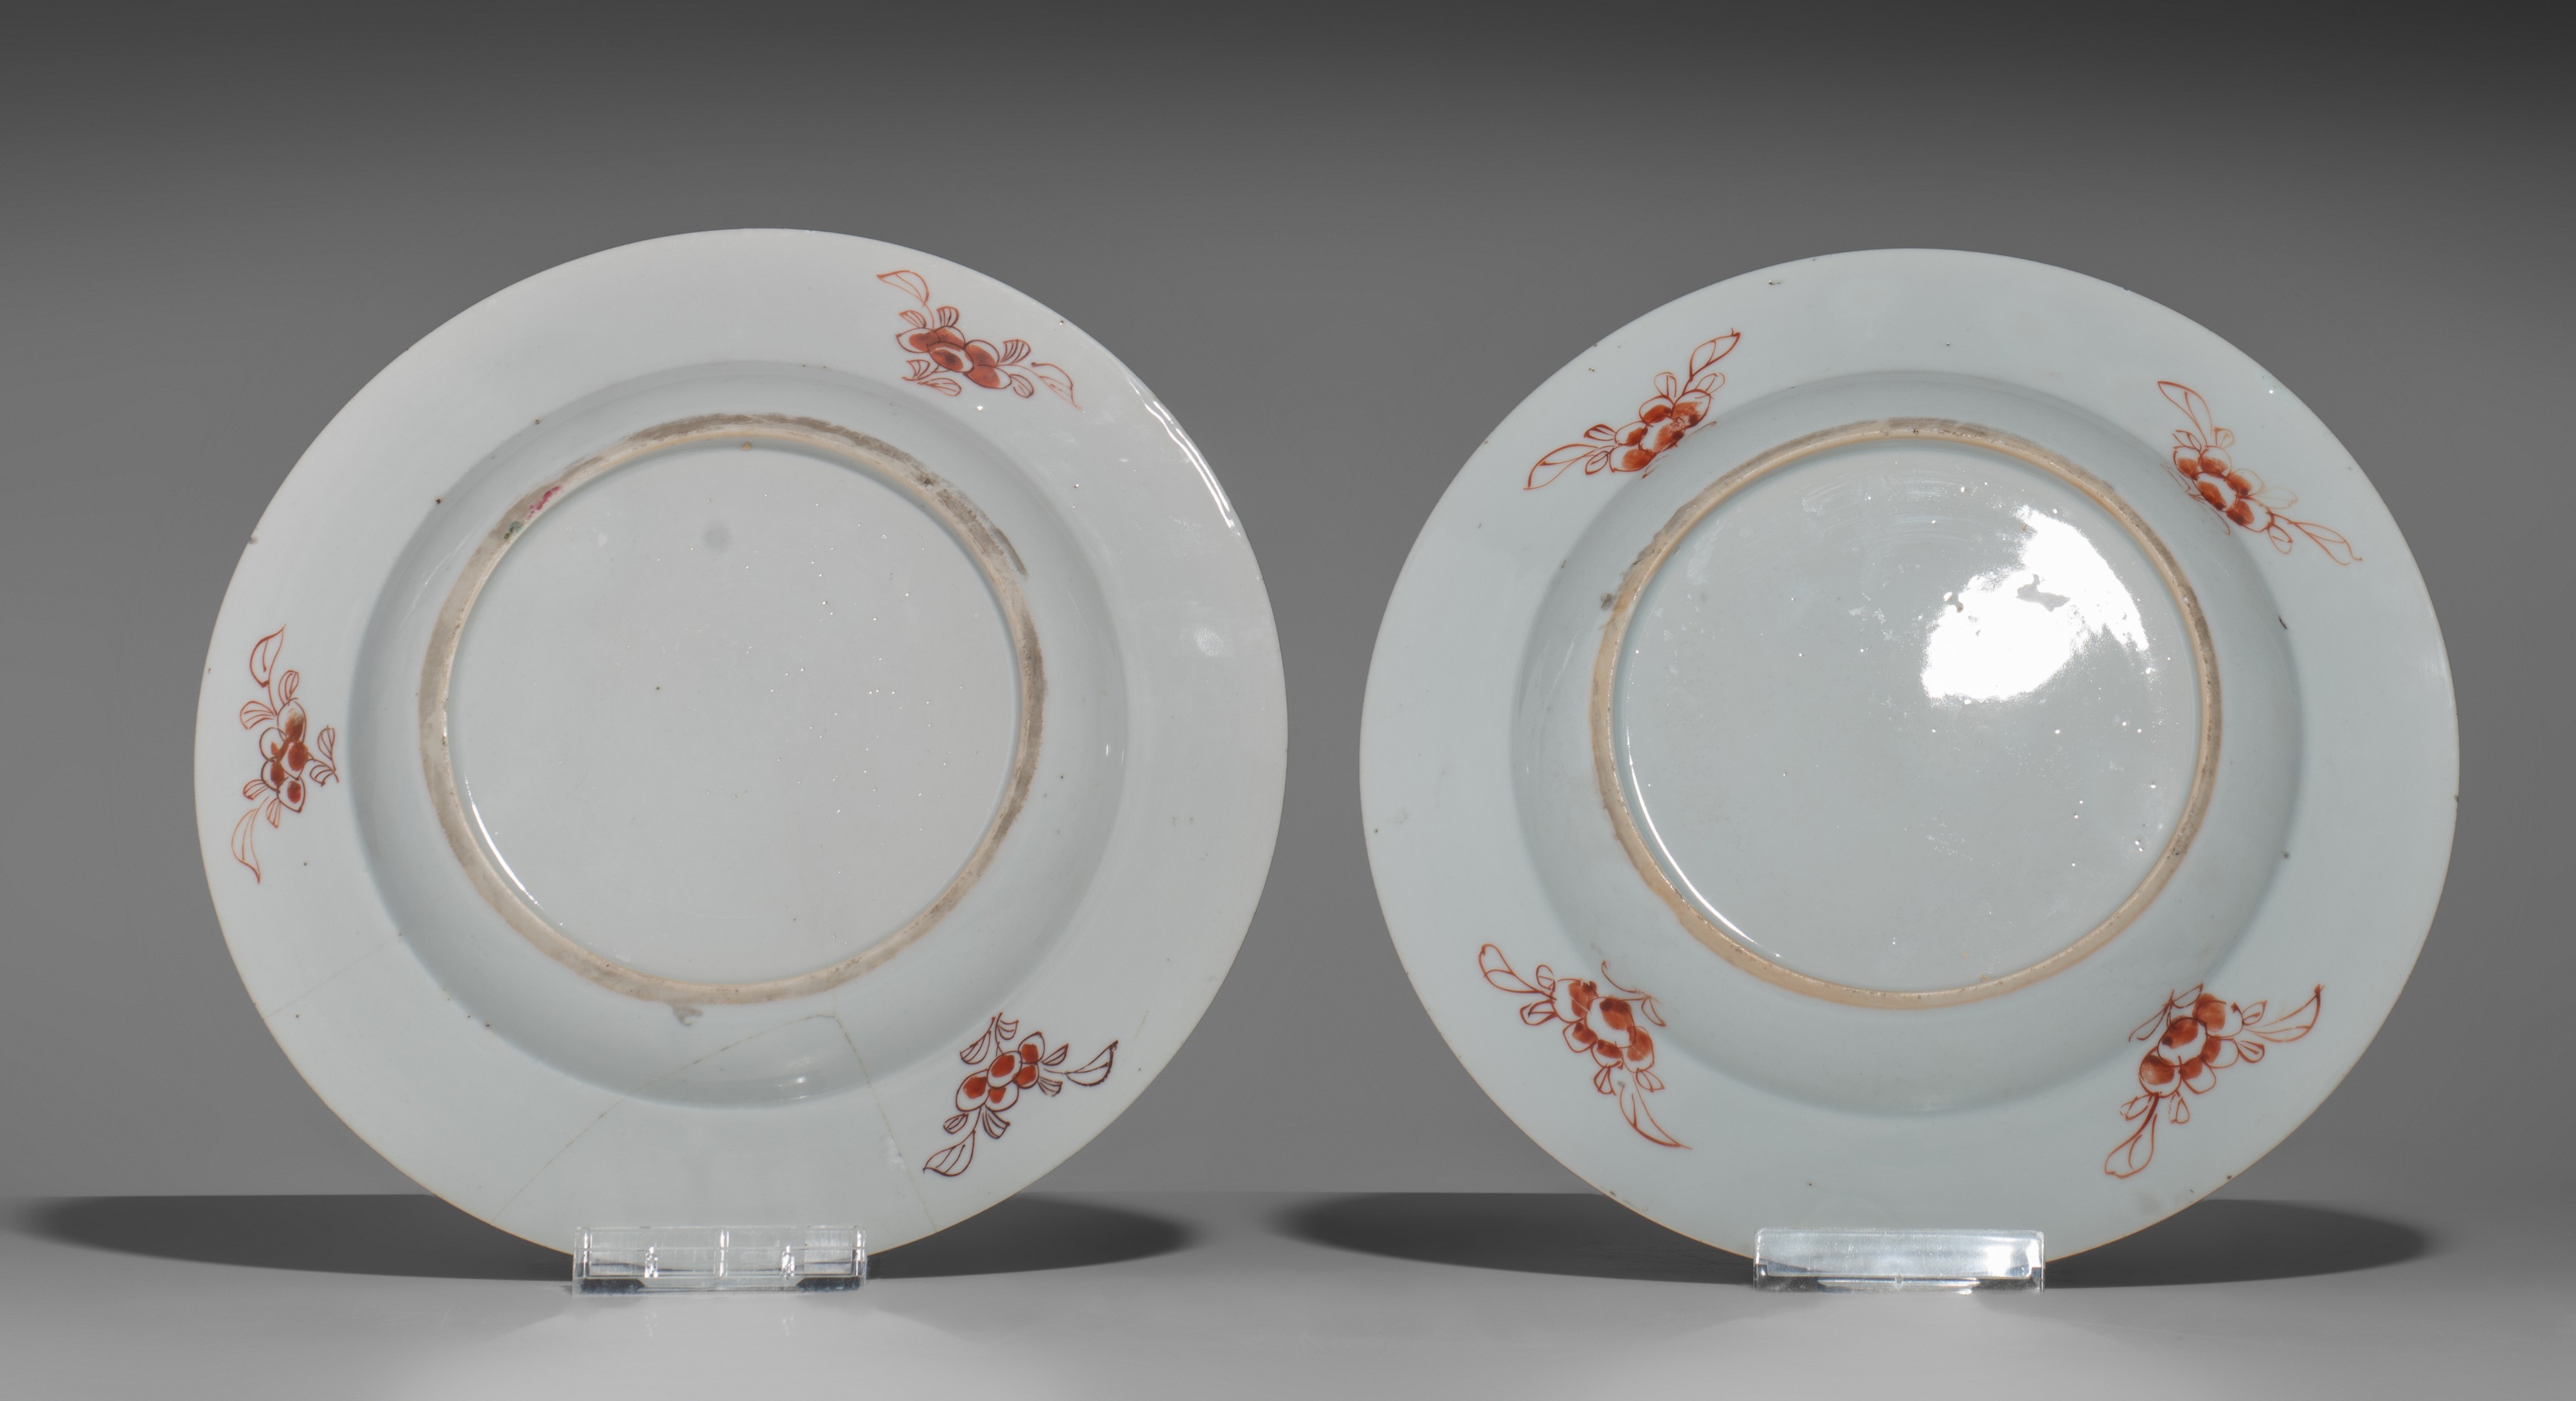 A collection of various Chinese export porcelain plates, Wanli, Qianlong and Guangxu period, ø 22 - - Image 9 of 11